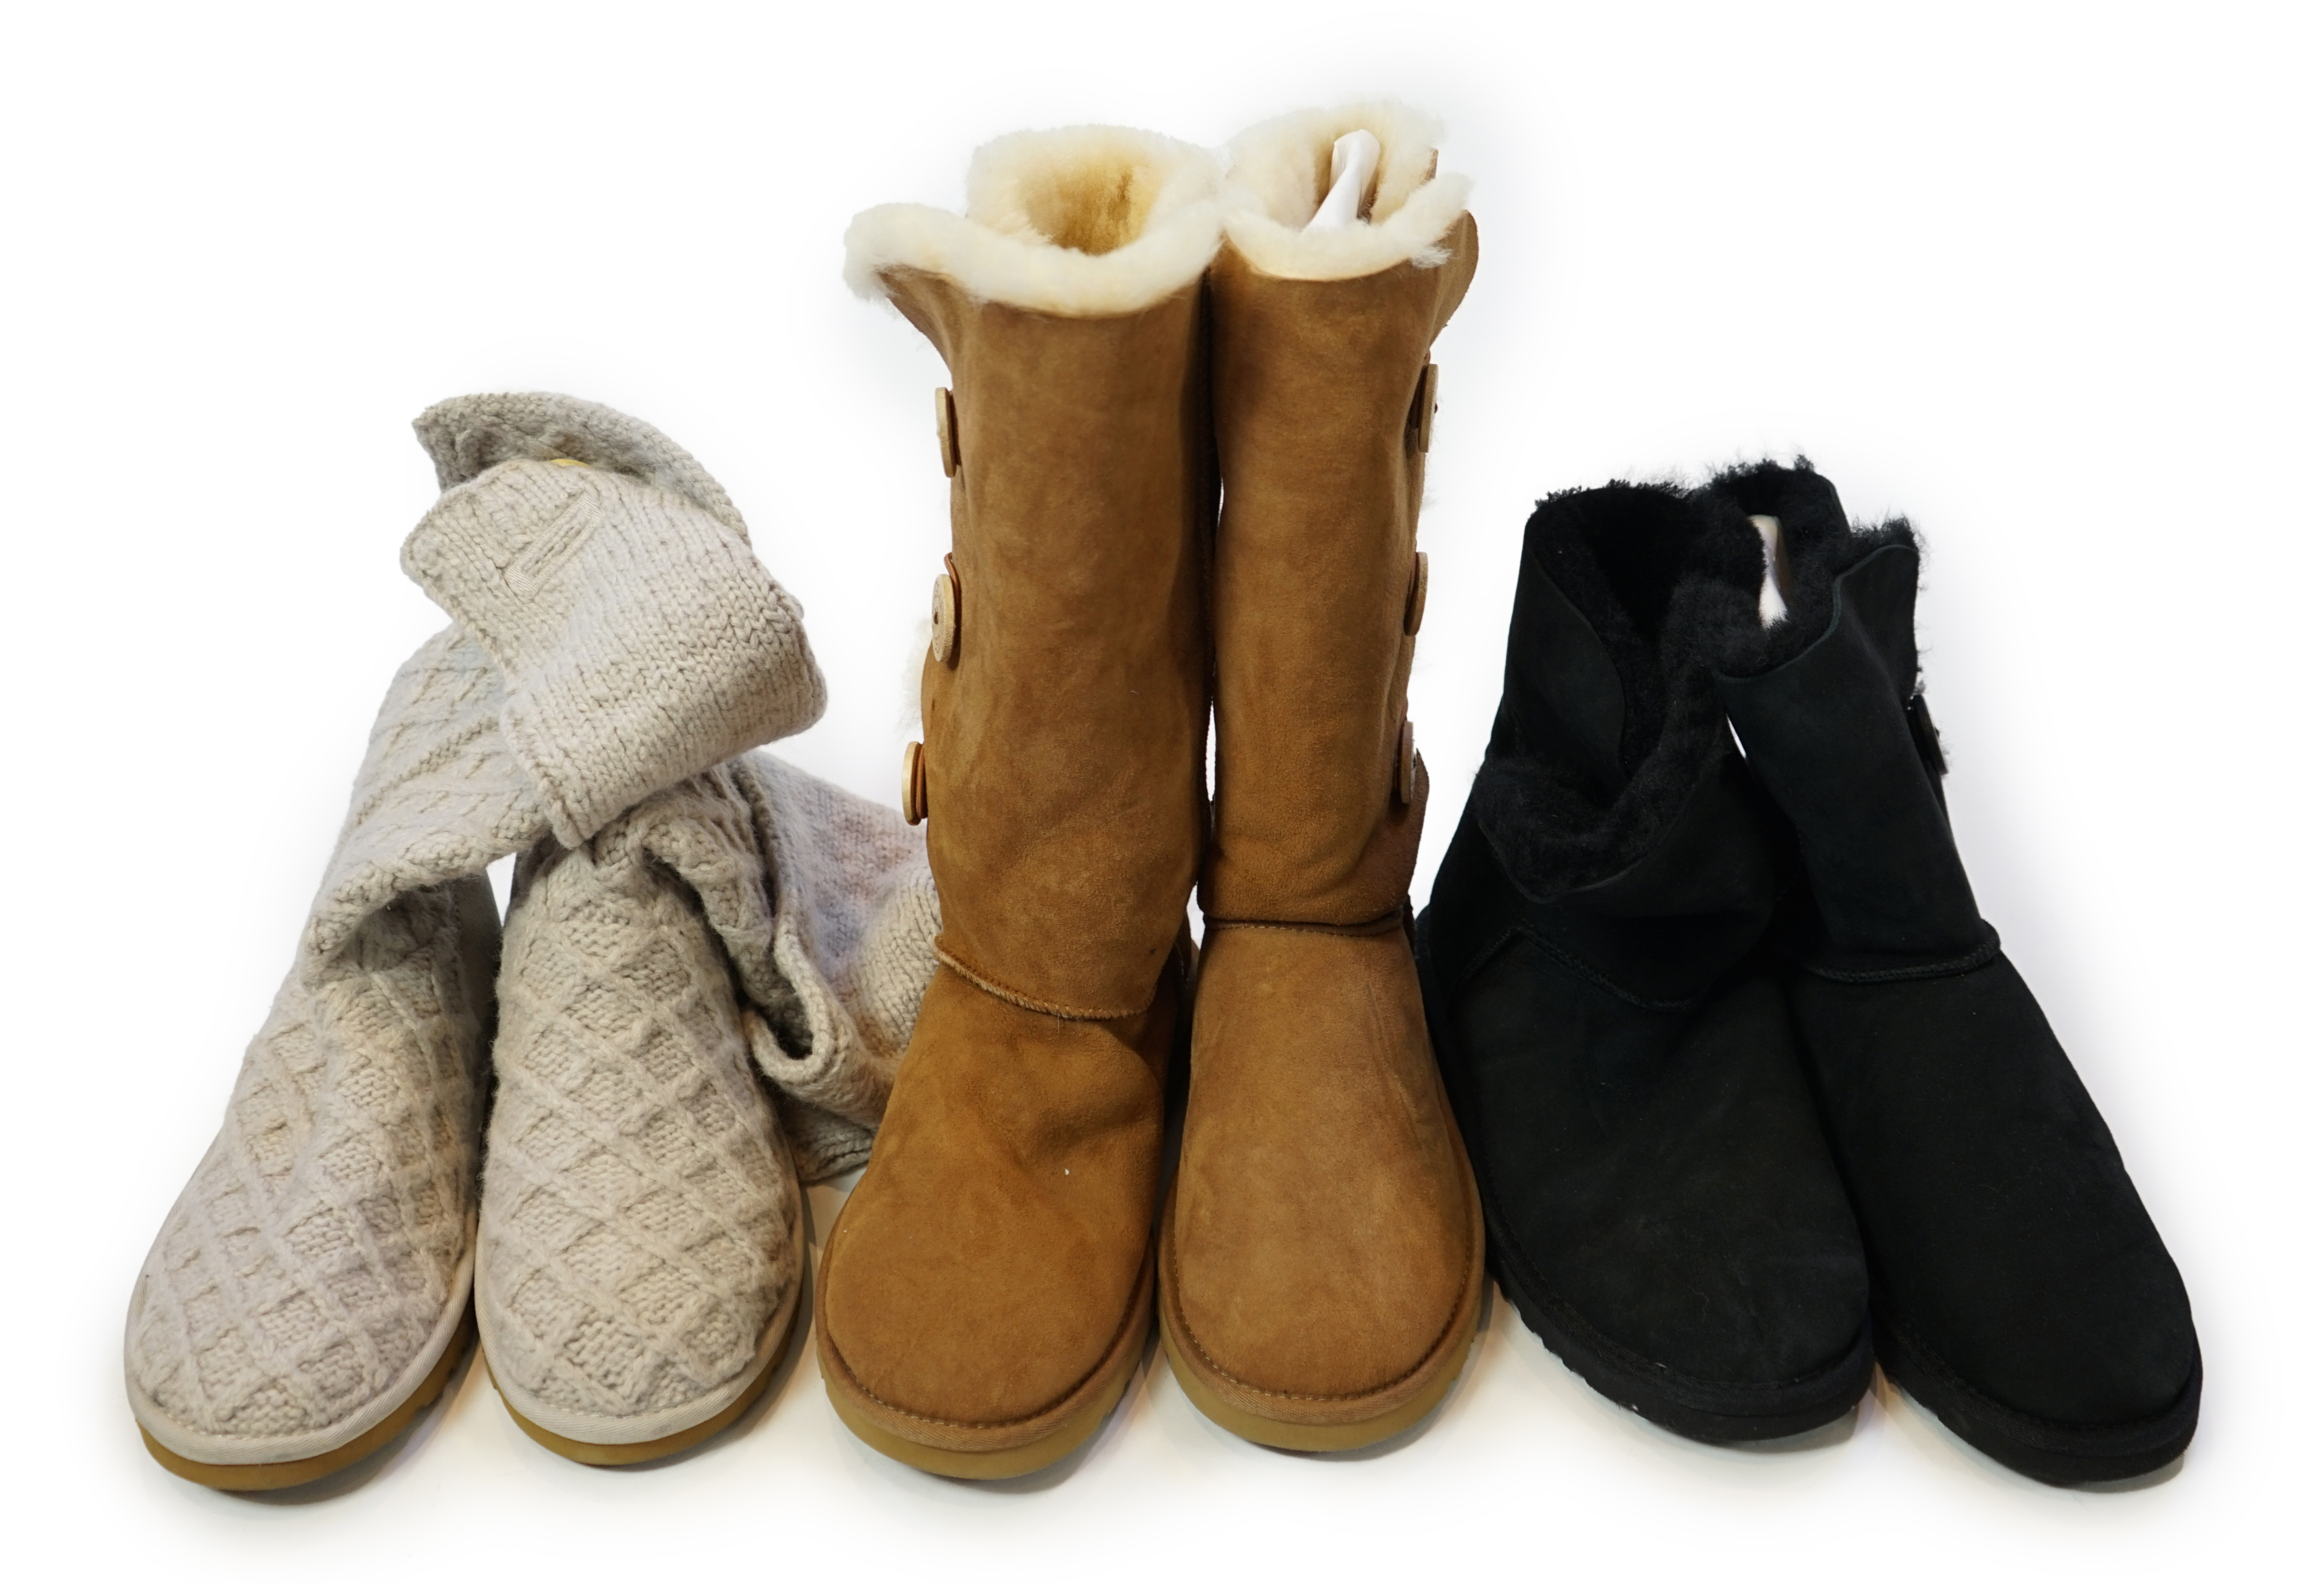 Three pairs of lady's low/mid height UGG sheepskin boots with side button design, size UK 7.5